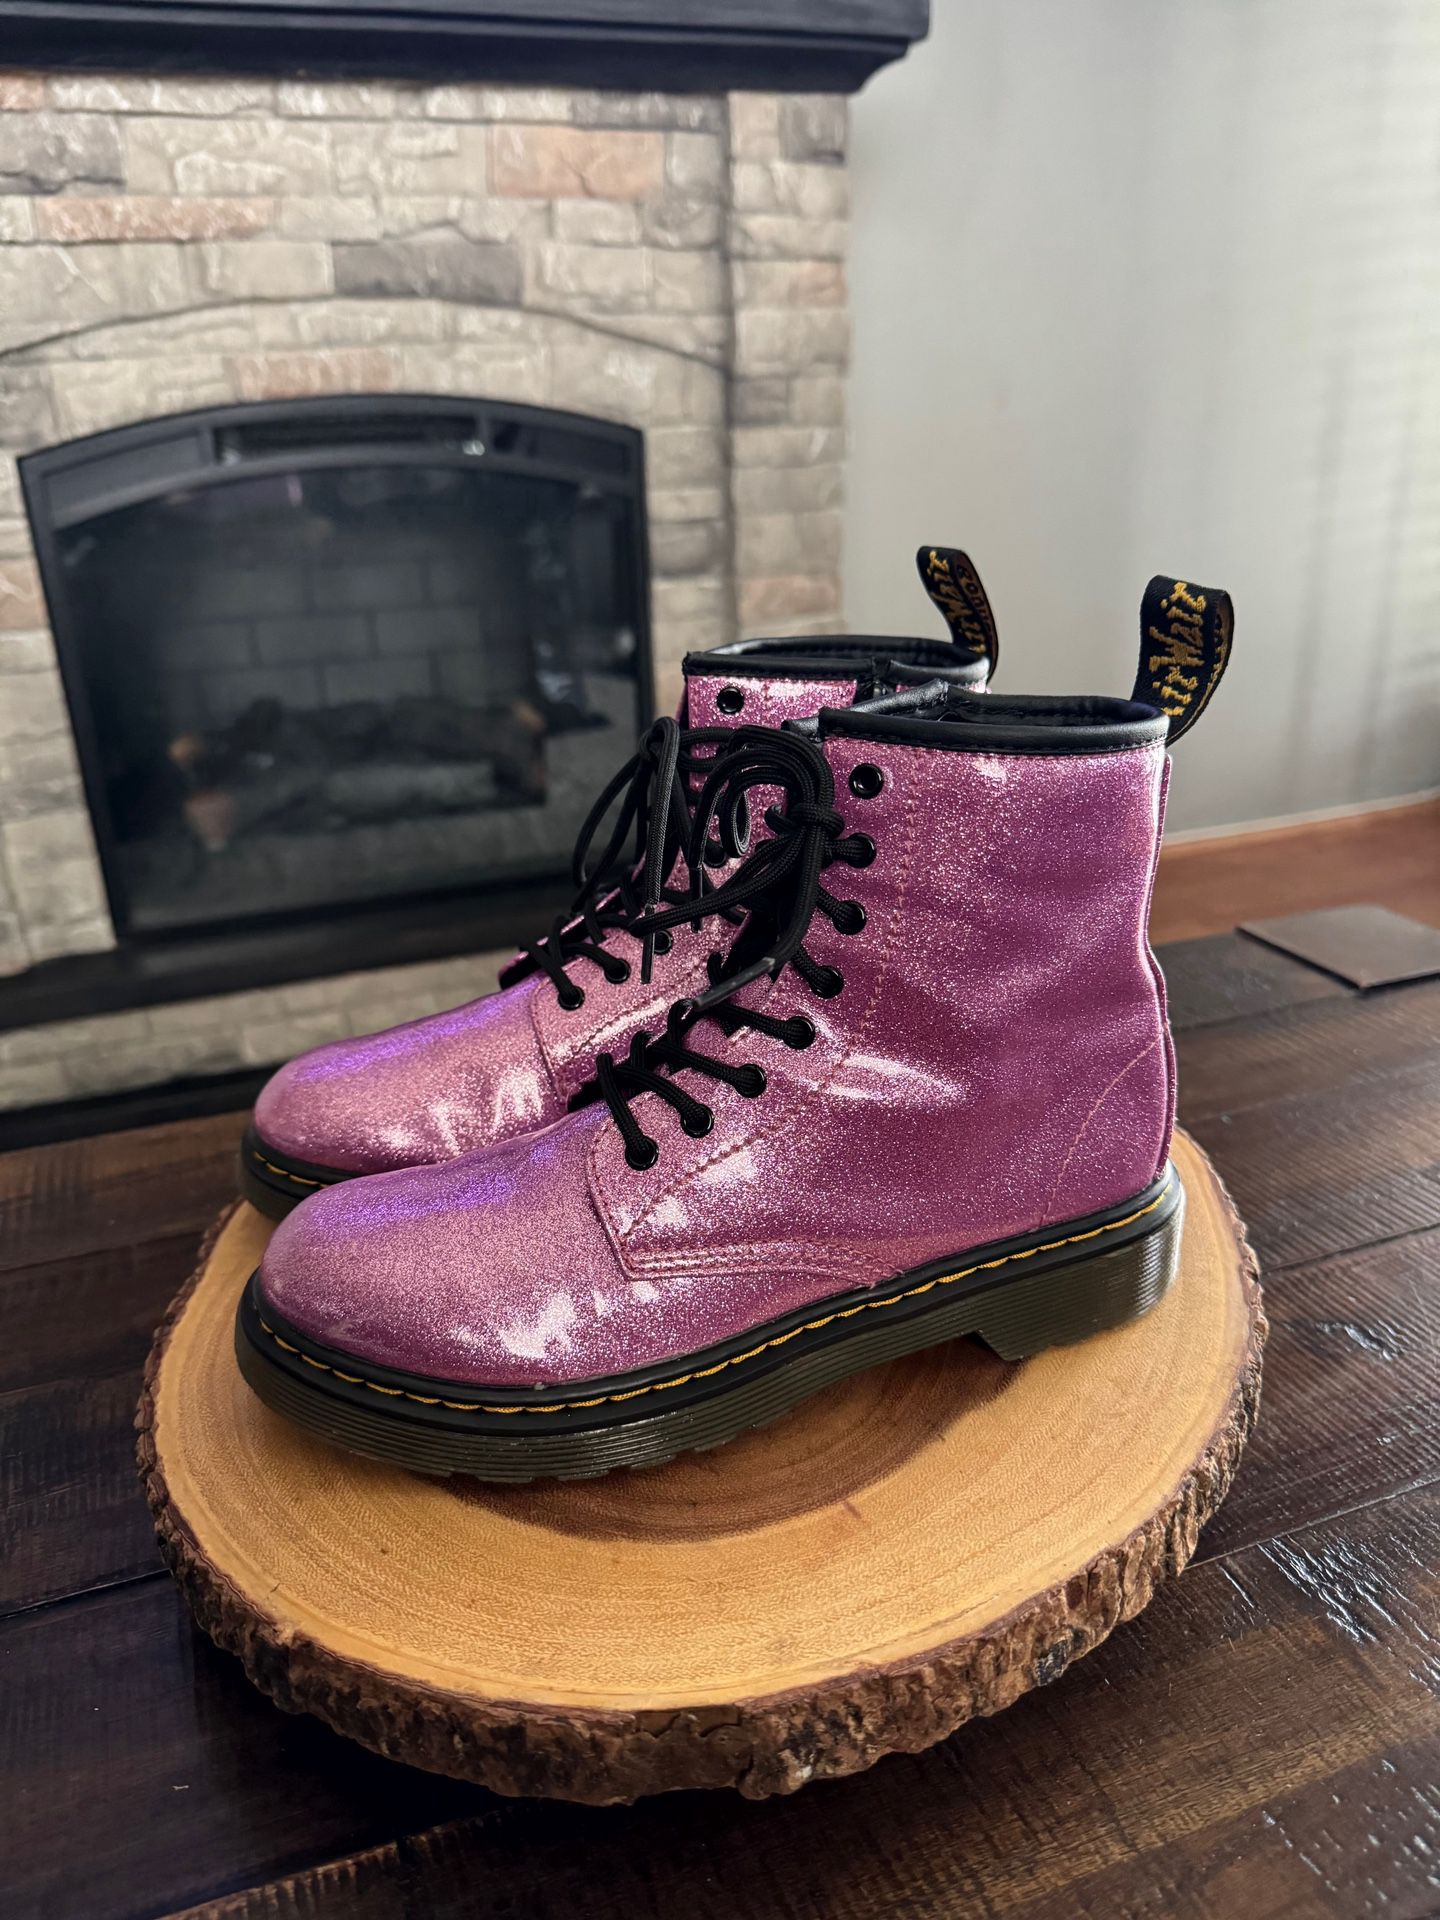 Dr. Martens 1460 8-Eye Glitter Boots. Size 3. Little girls. Color Pink glitter. Great condition. 